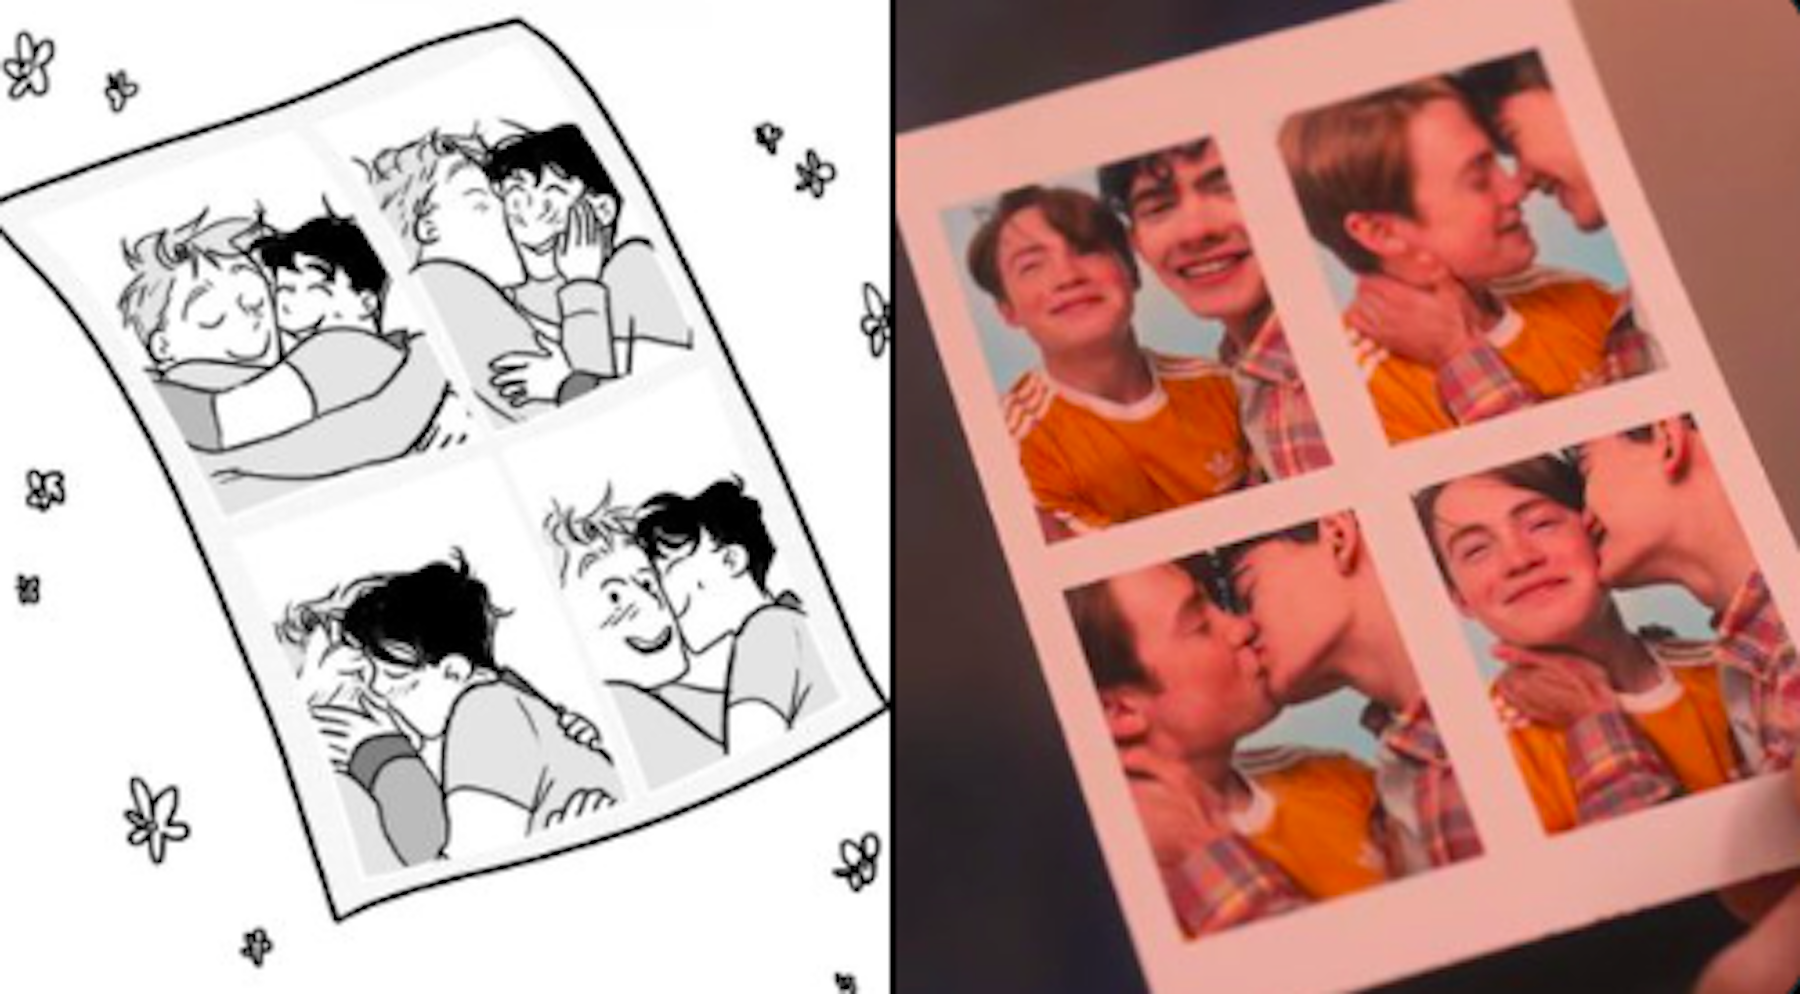 A side-by-side comparison of a panel from "Heartstopper" the webcomic and a screencap of "Heartstopper" the show, showing four photo booth pictures of Nick and Charlie together. 